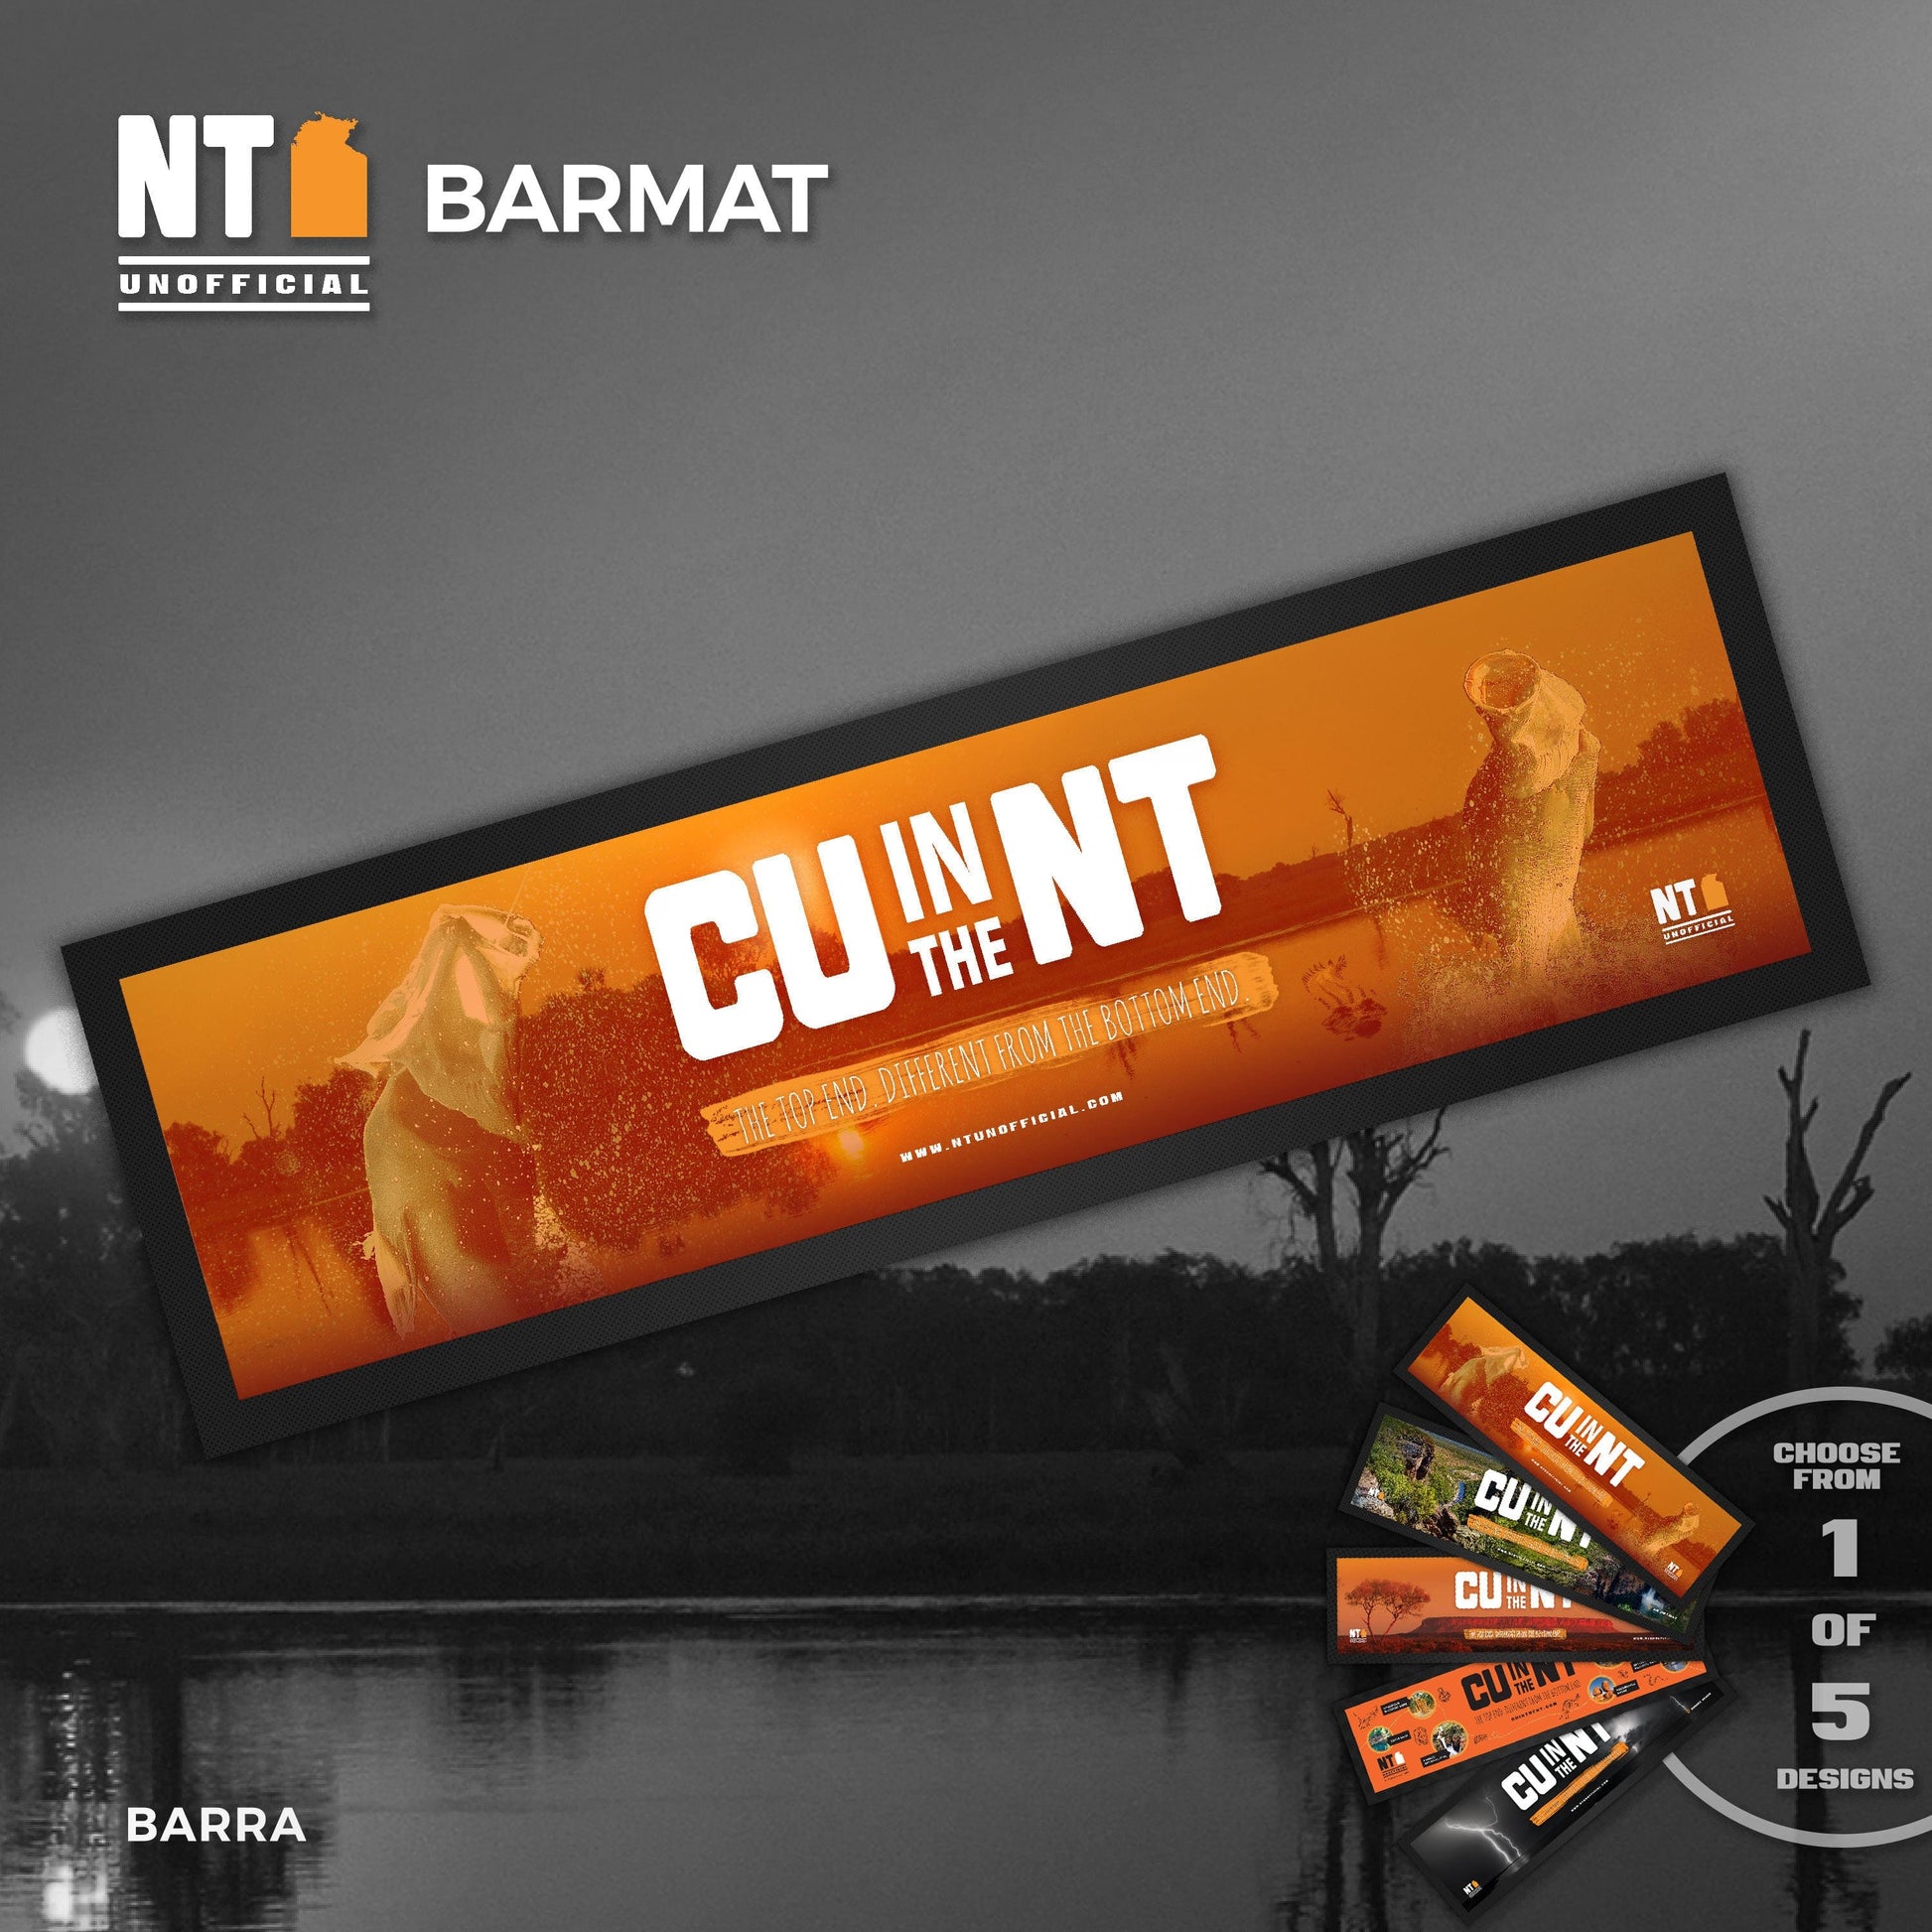 CU in the NT Barmat - NT Barra NT Unofficial